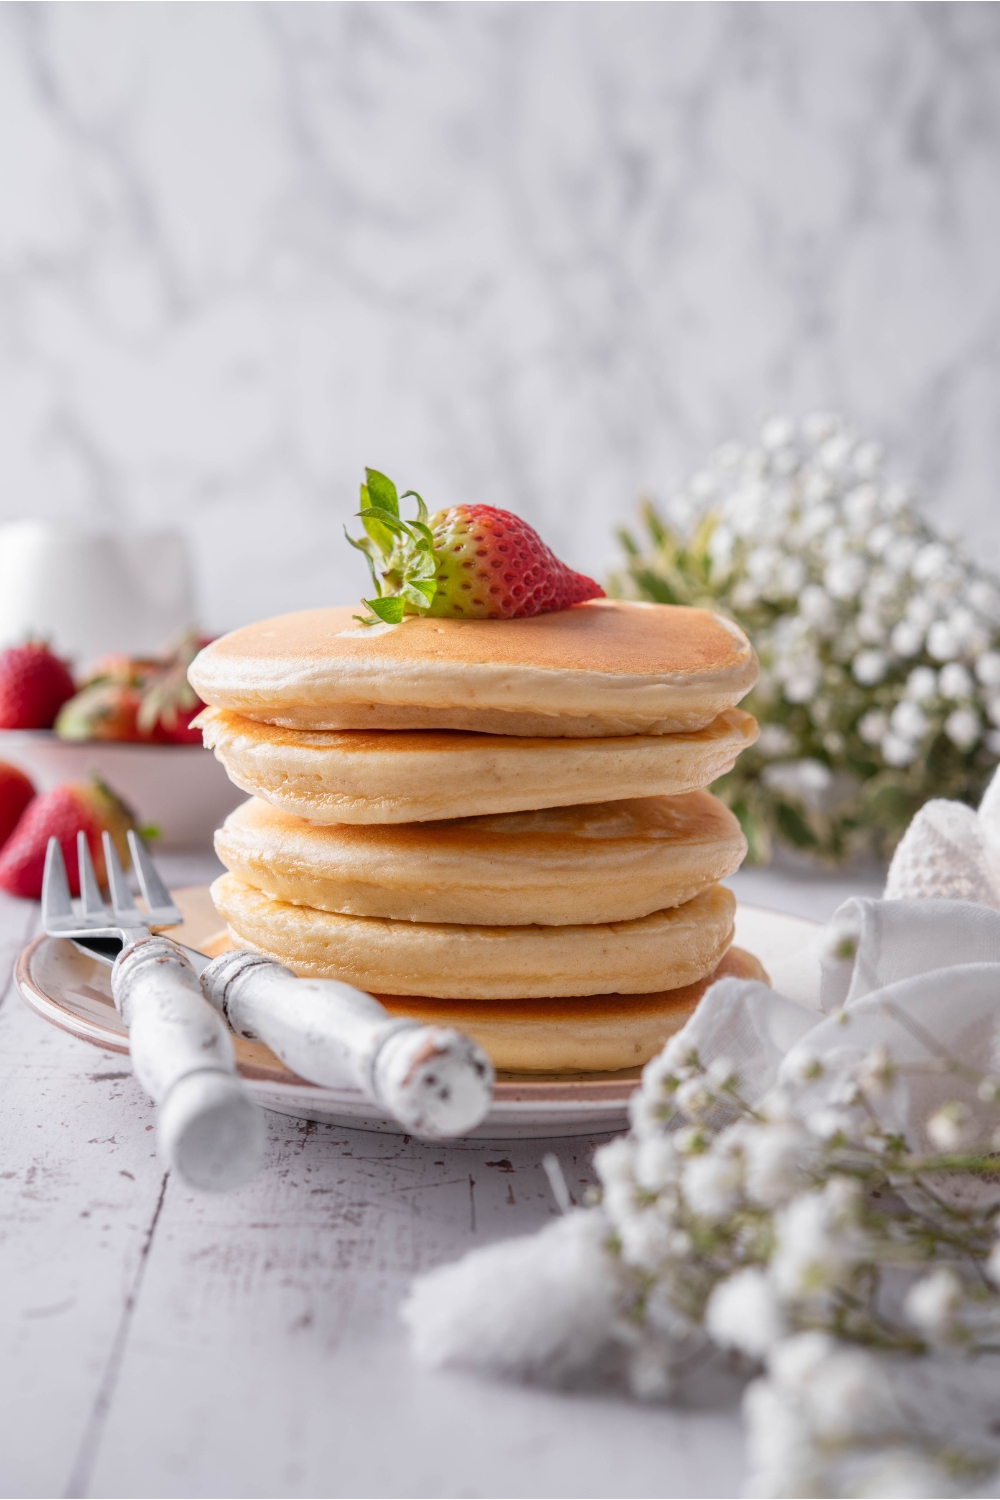 A stack of fluffy pancakes covered in maple syrup with a strawberry on top. The pancakes are on a white plate with a set of silverware.